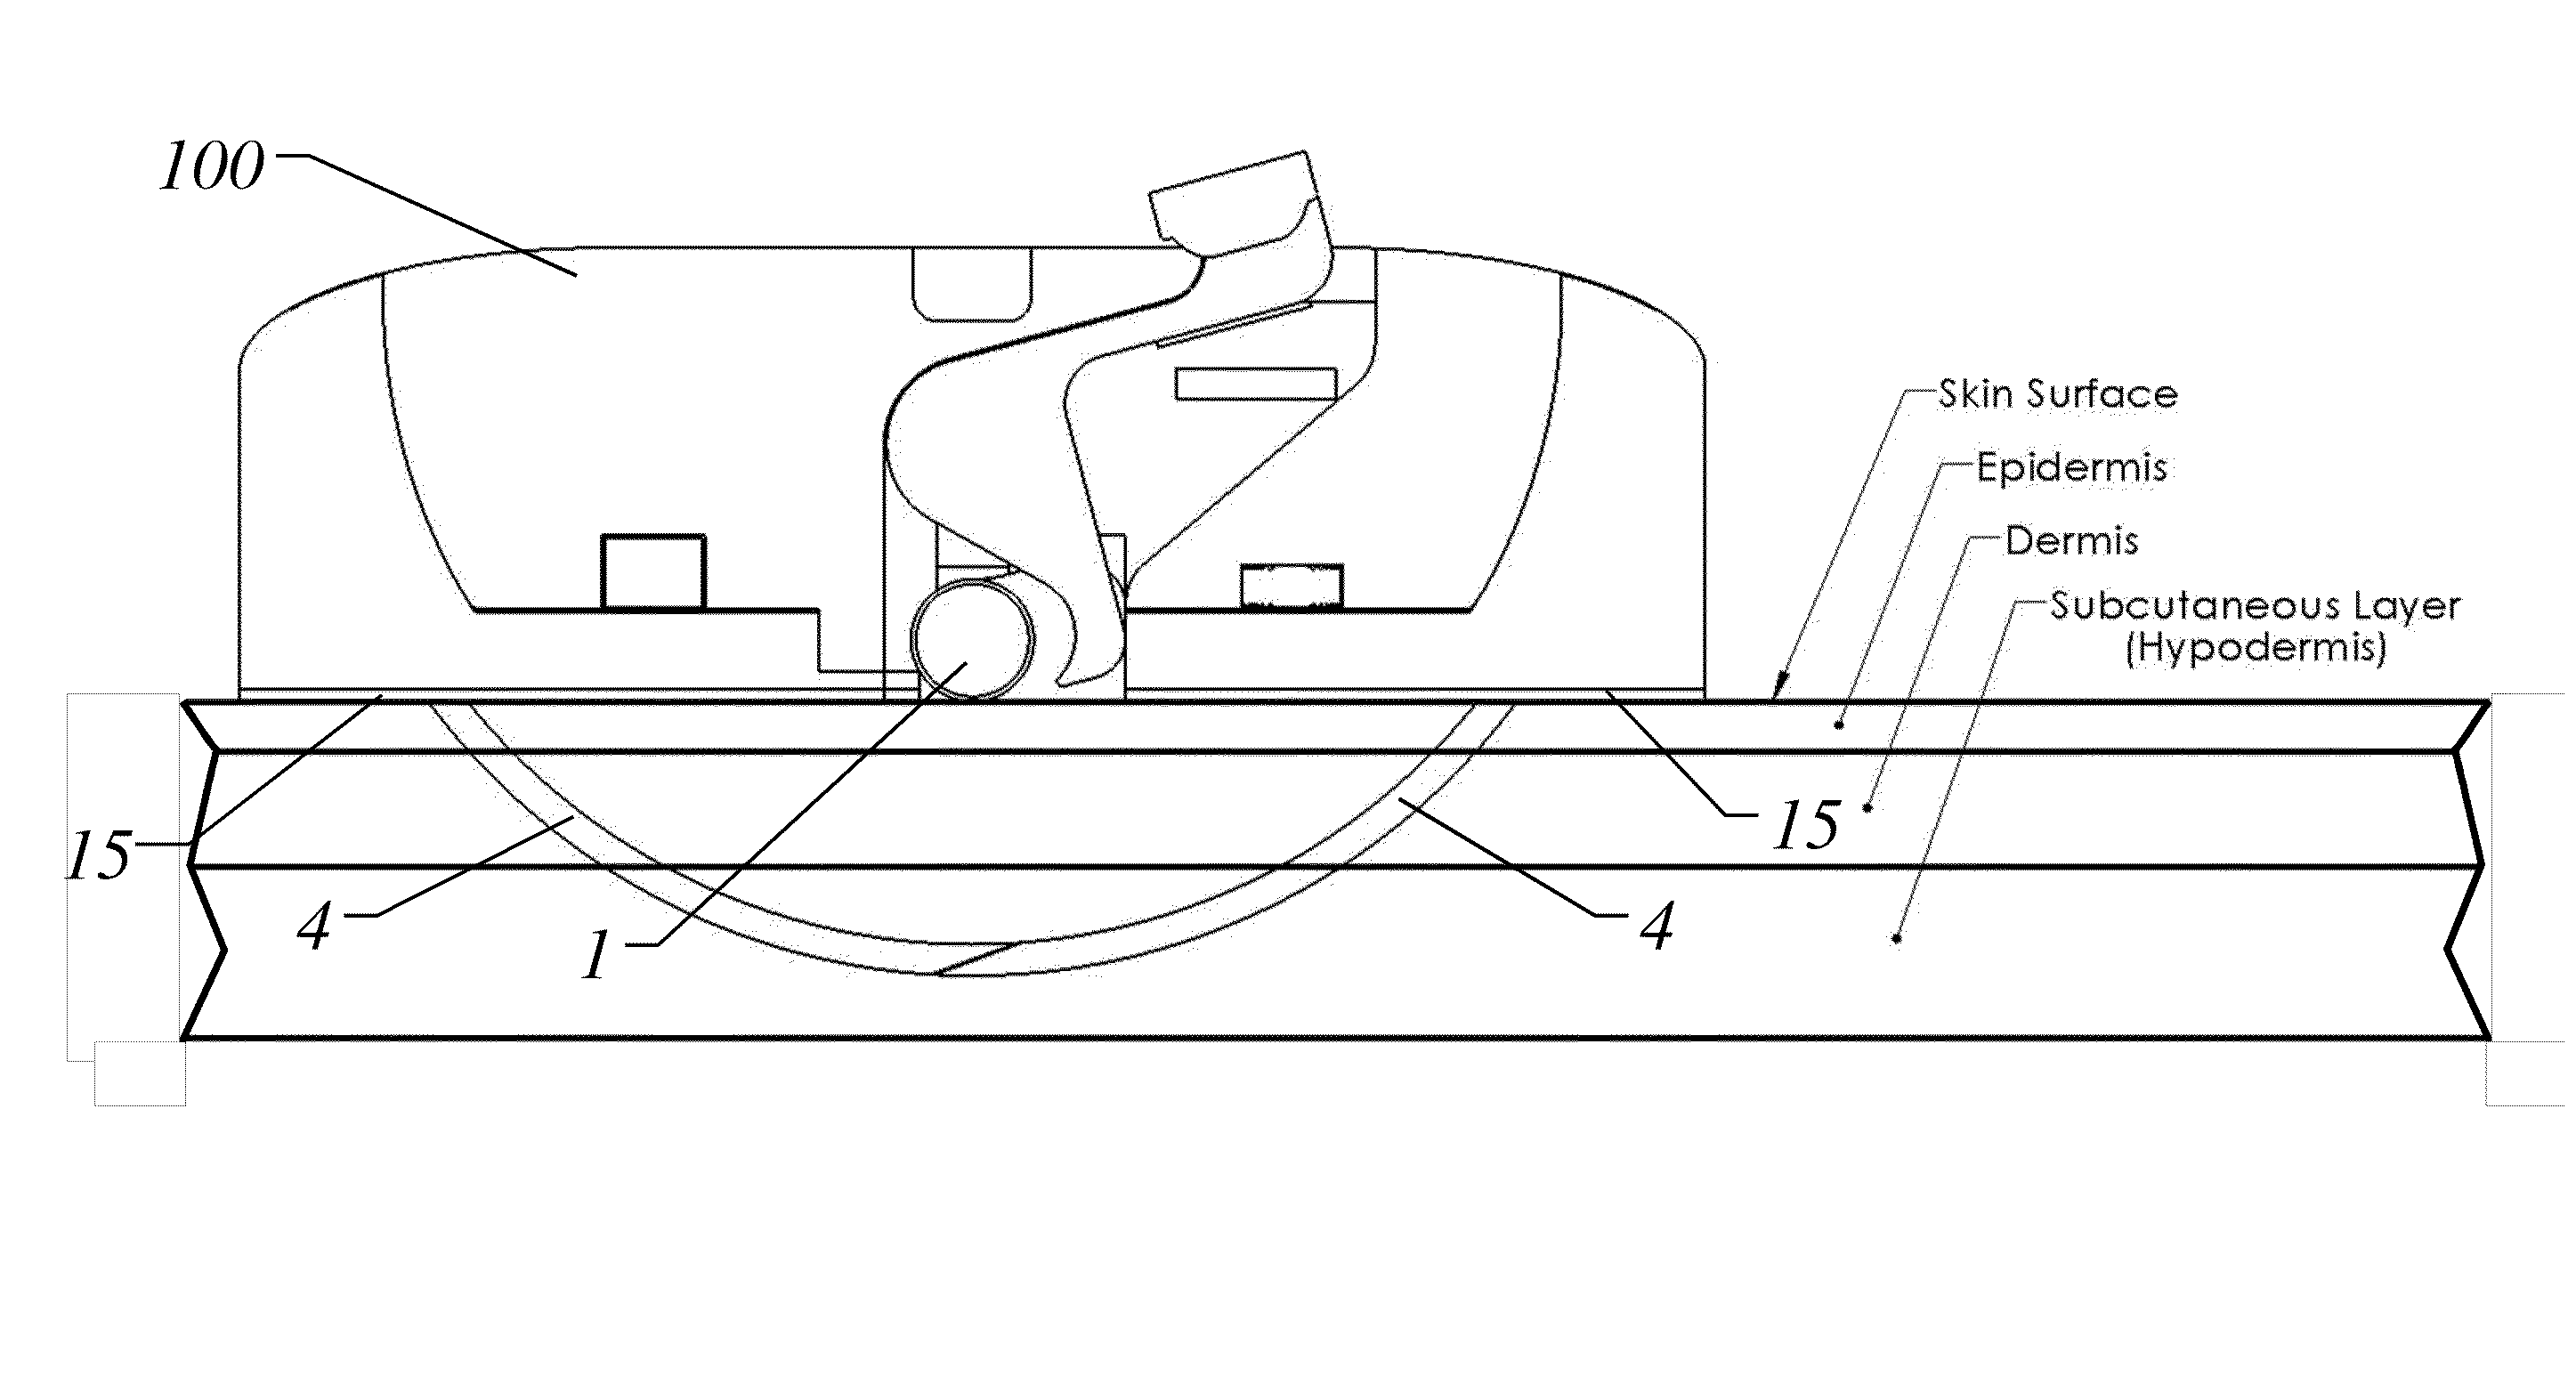 Catheter anchoring device and method